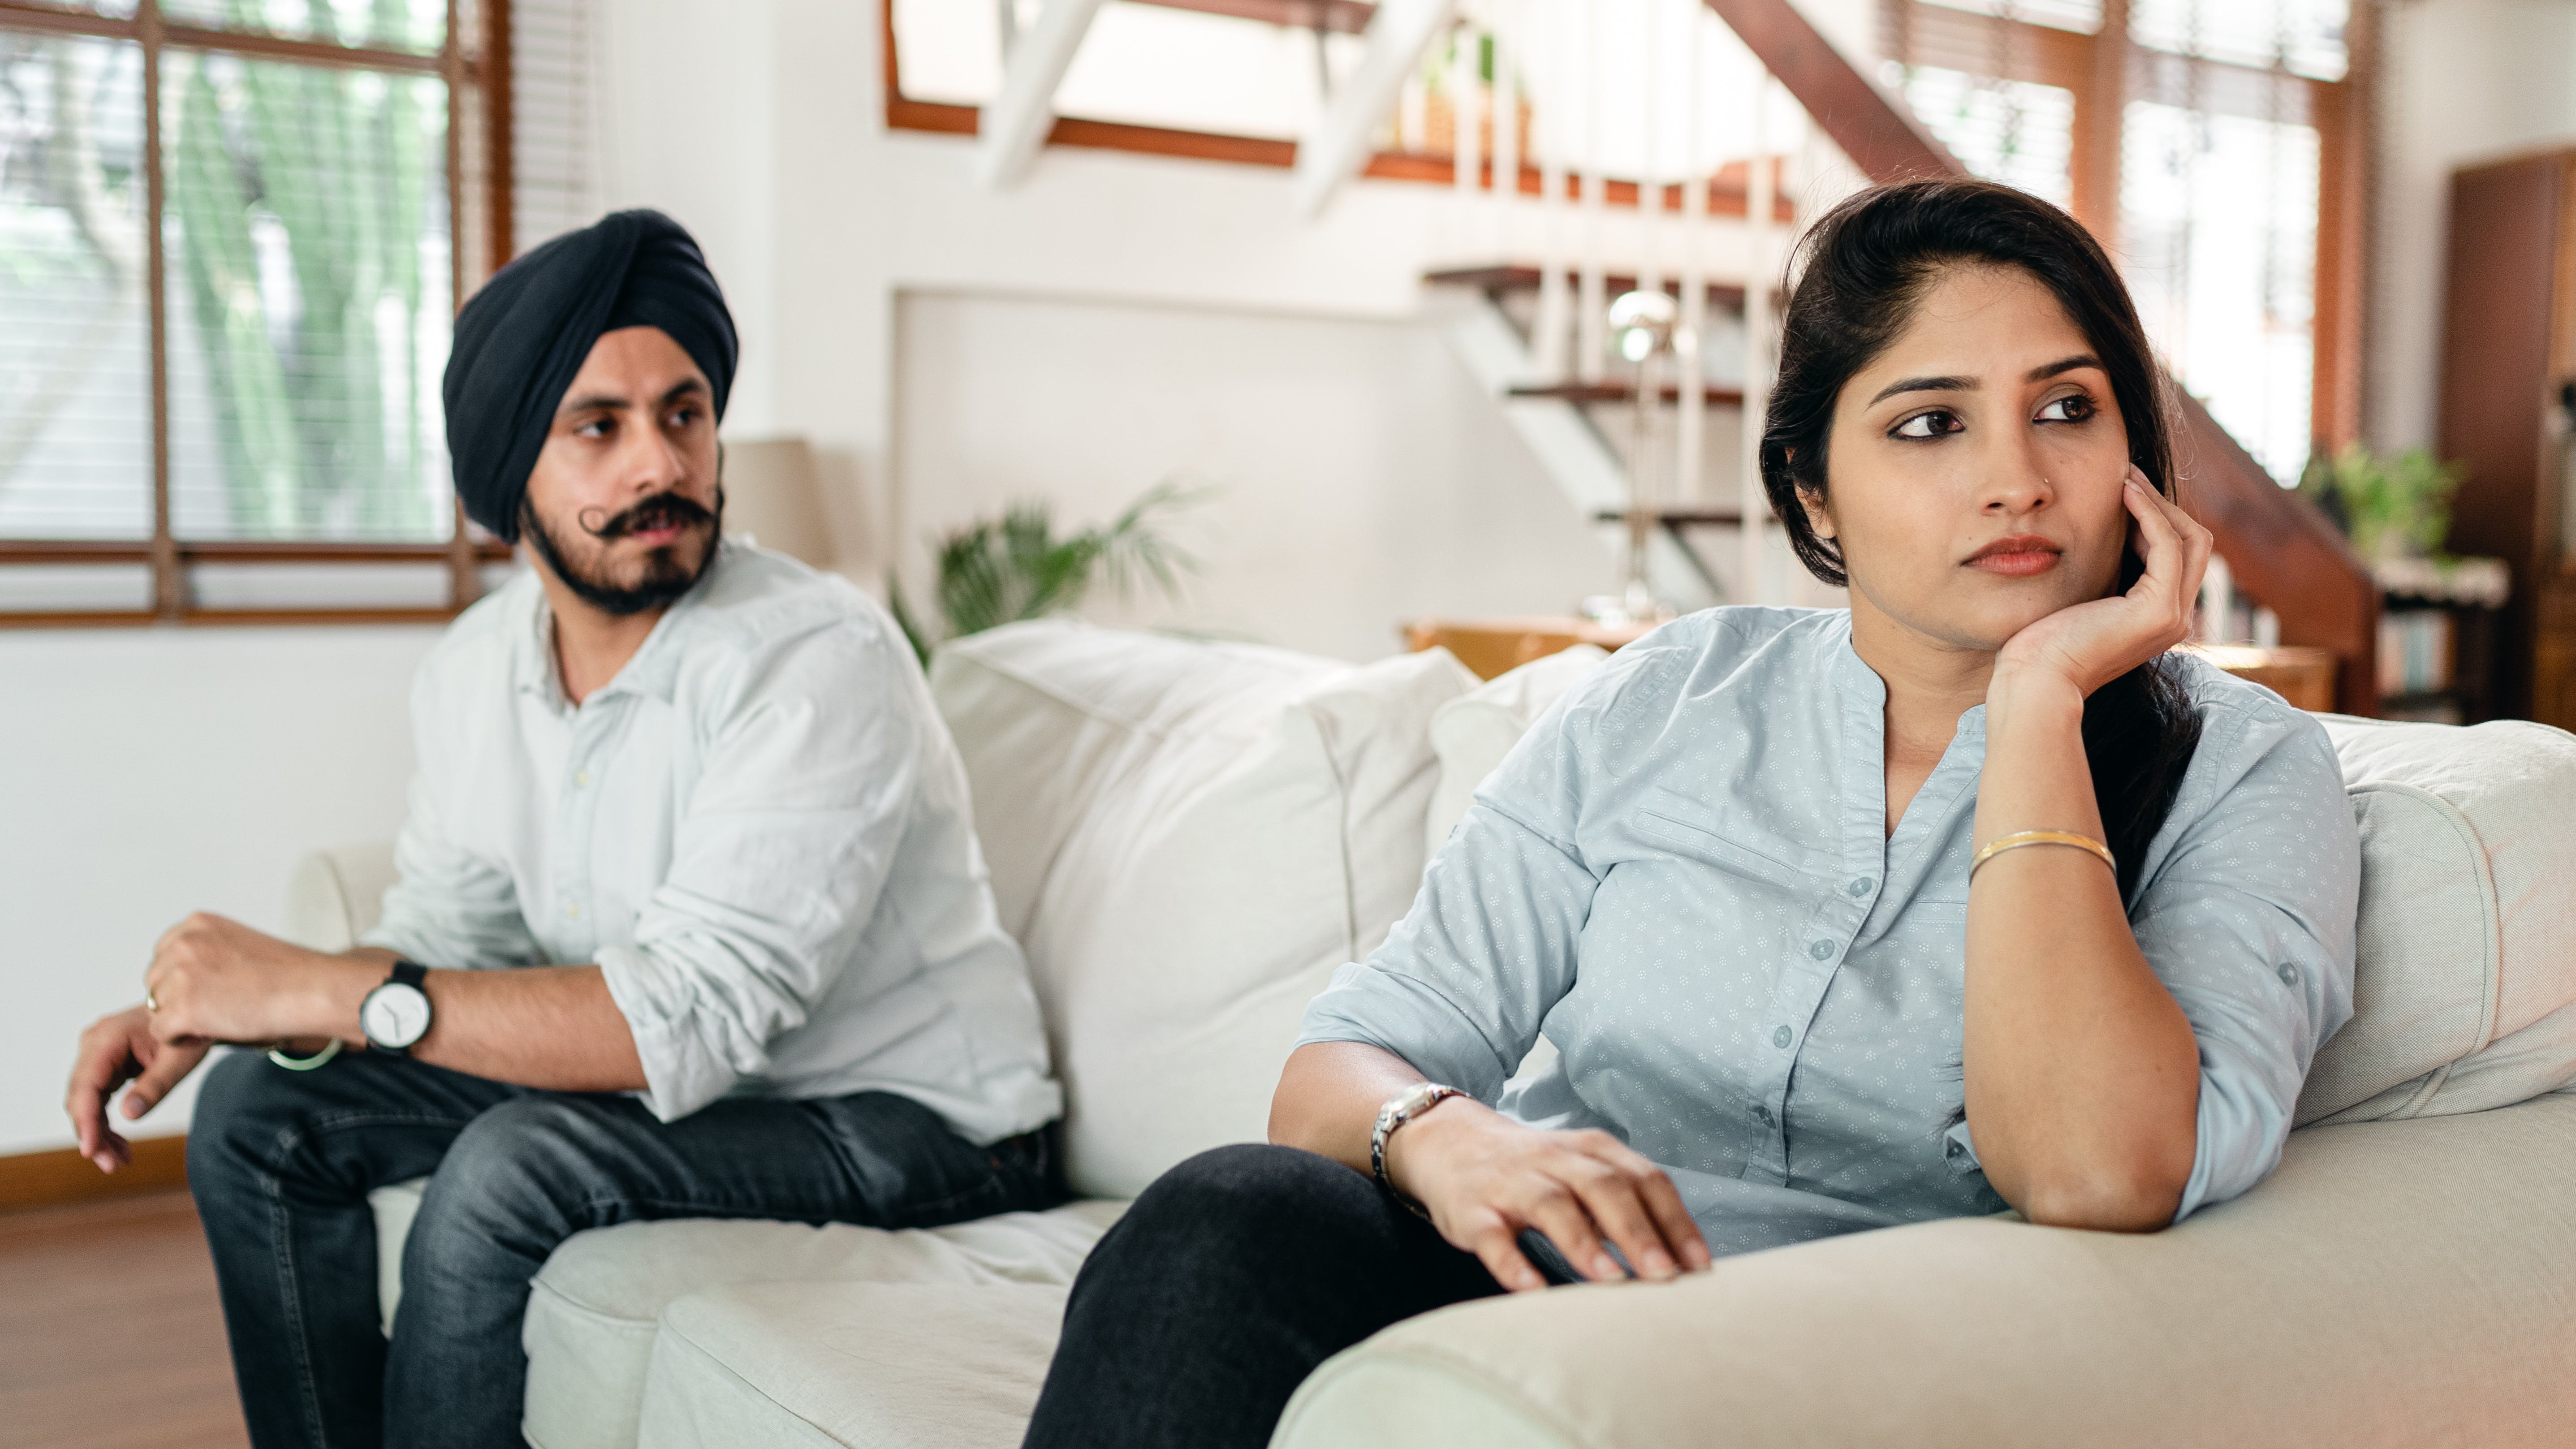 A man a a woman sitting on a couch | Source: Pexels